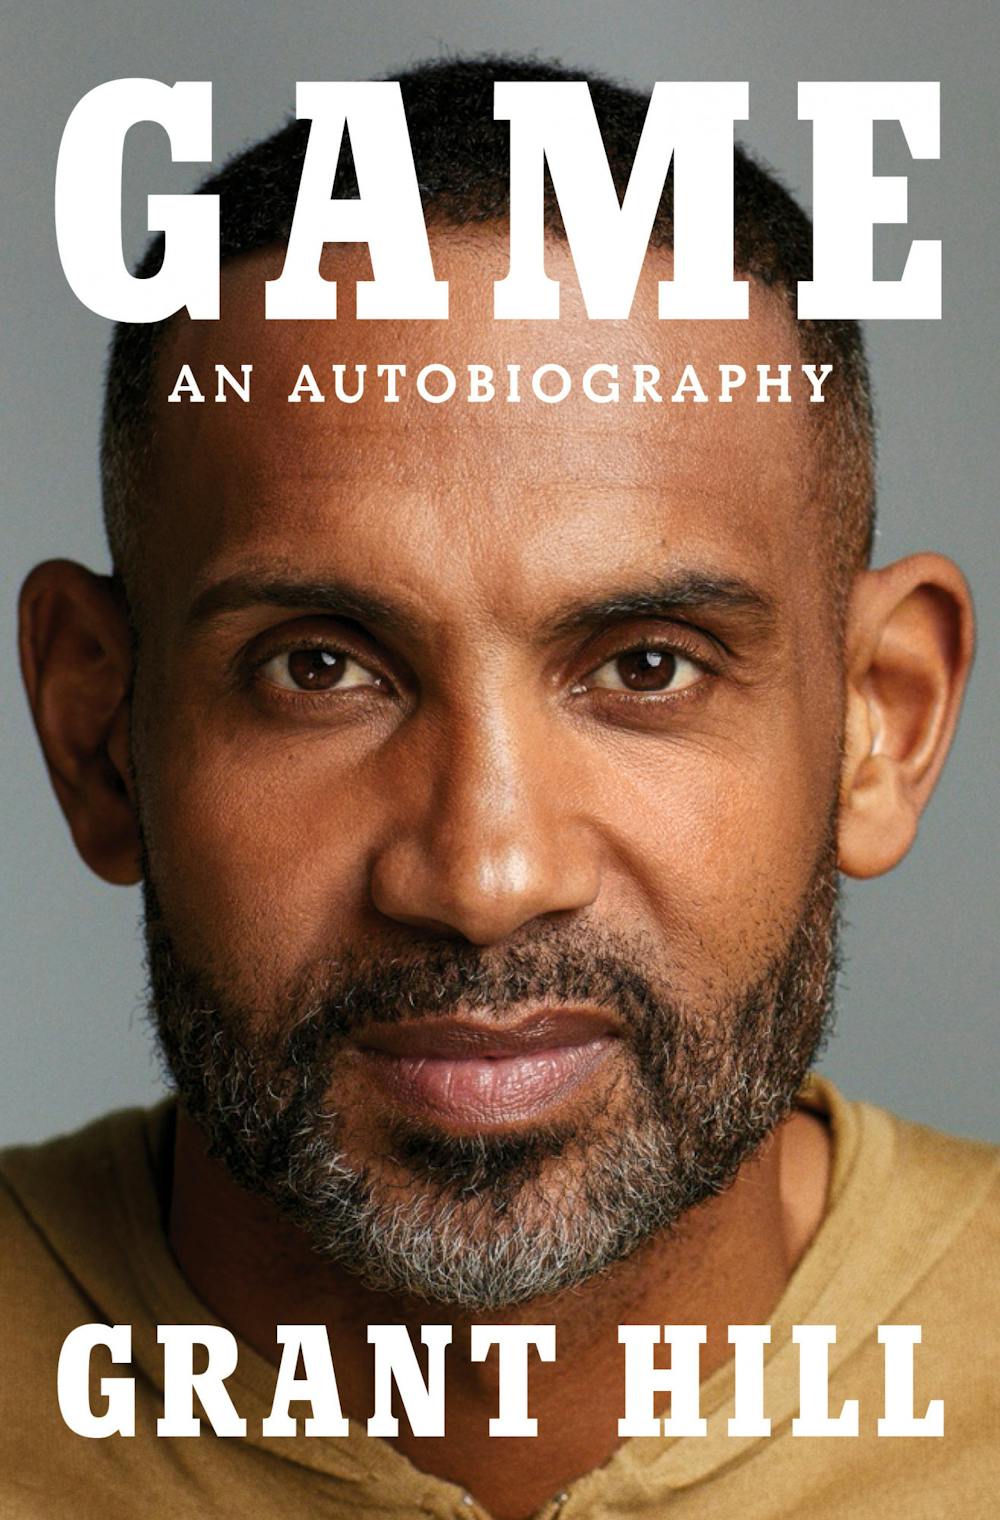 Grant Hill will speak Wednesday evening at Duke about "Game," his new autobiography.